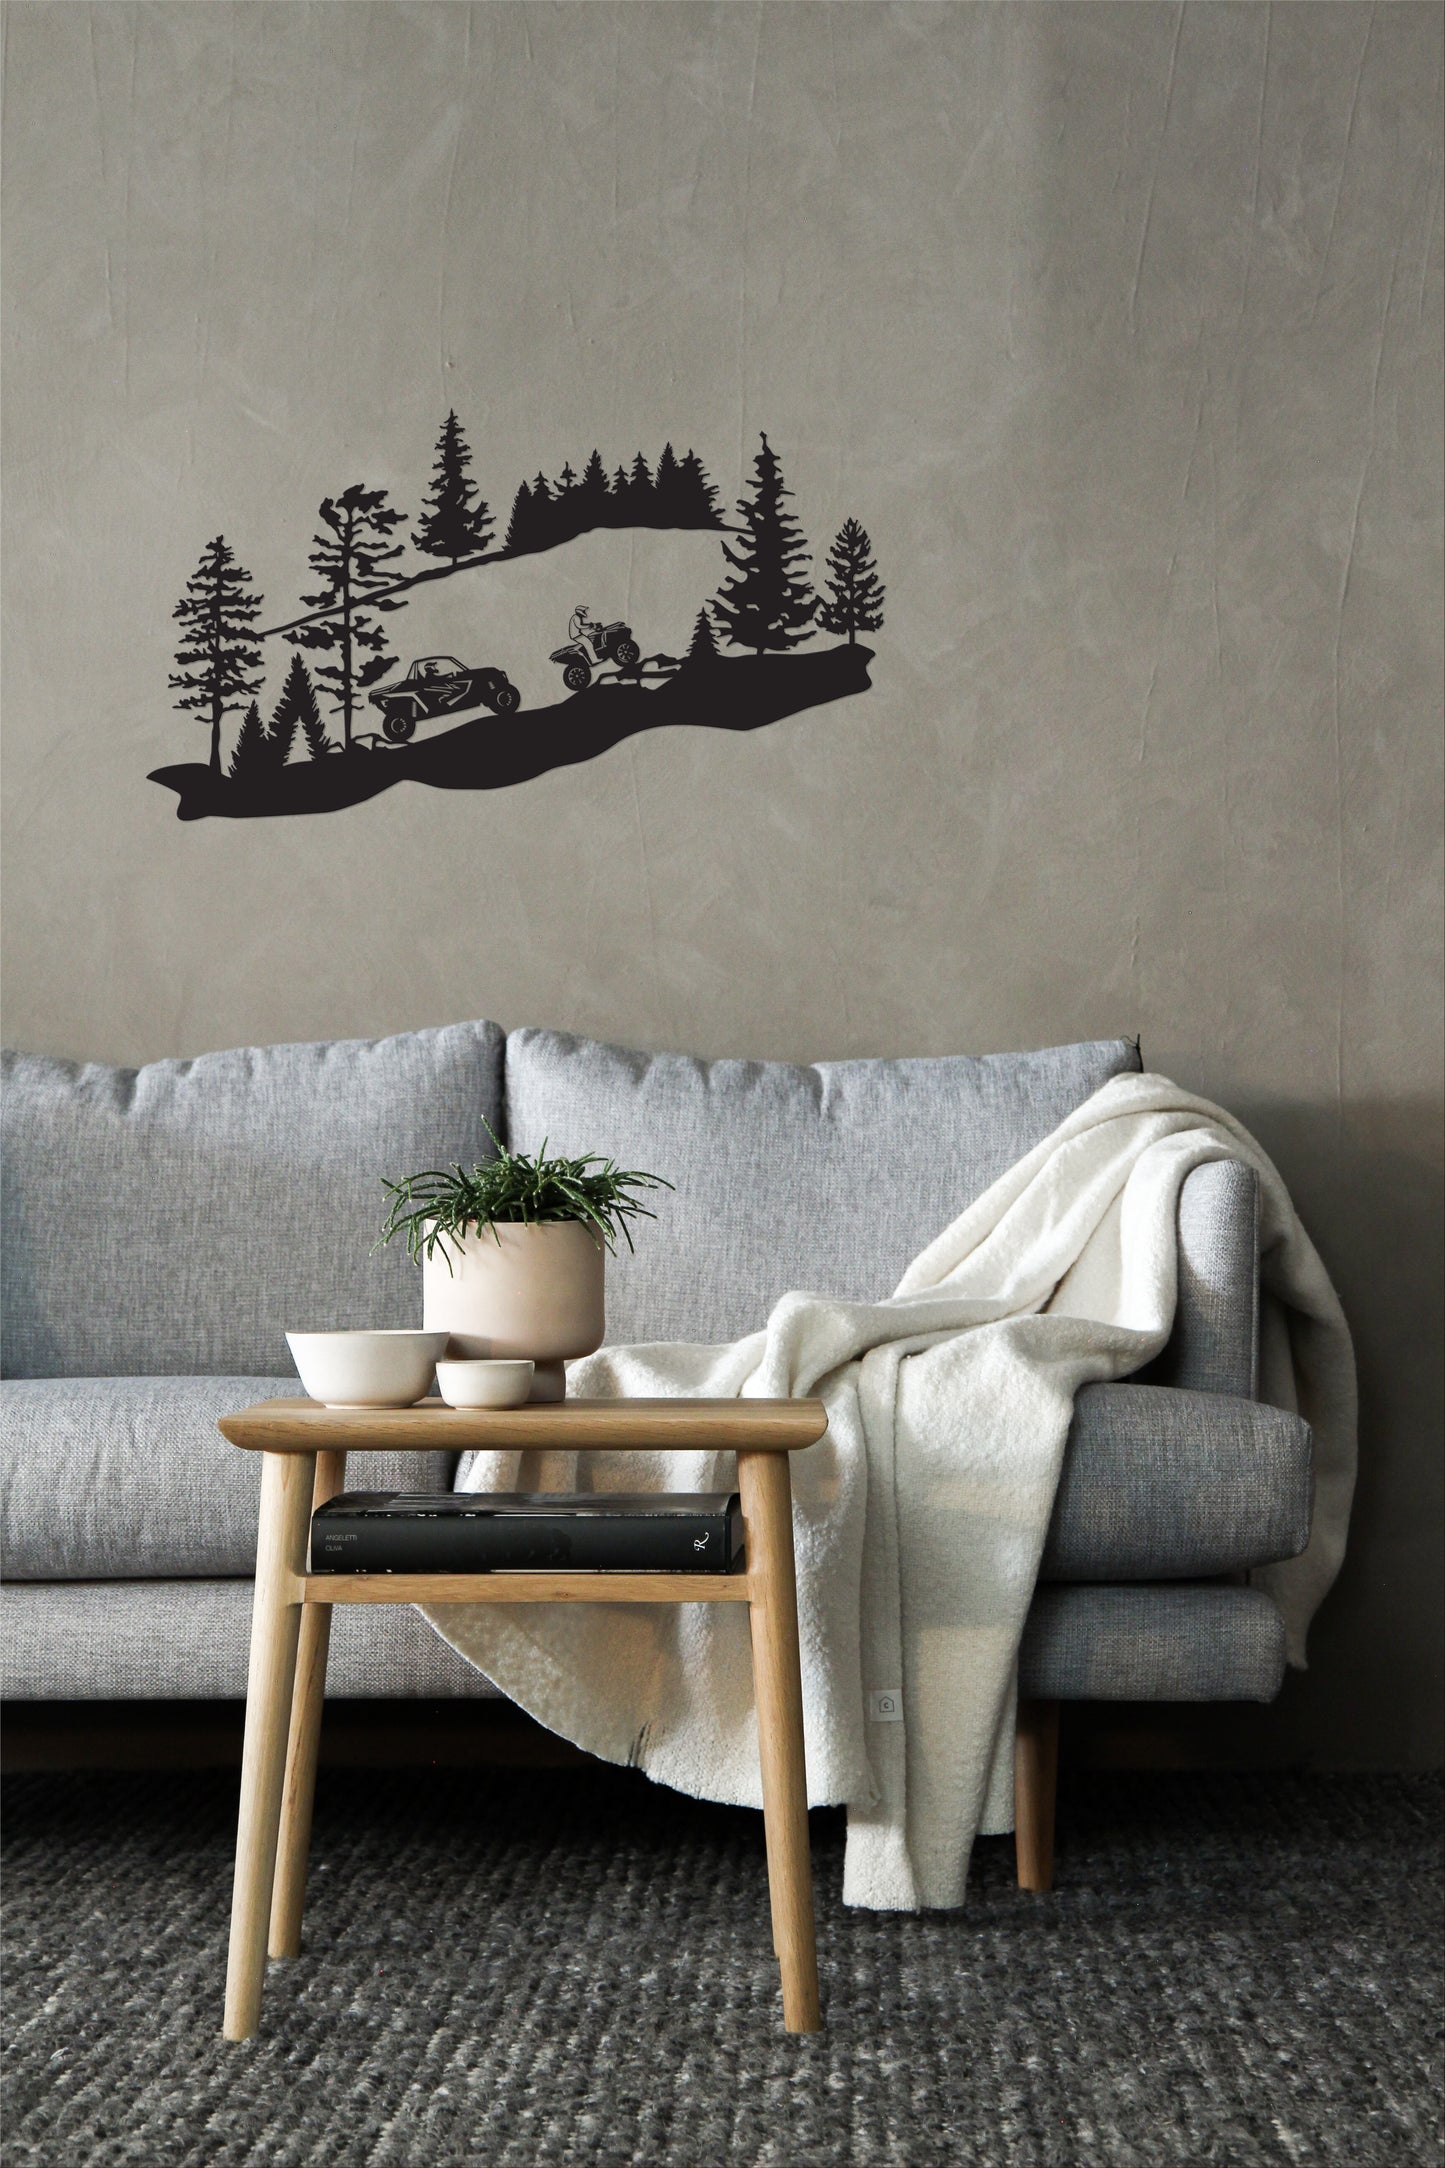 Offroad Wall Art - ATV and Side x Side